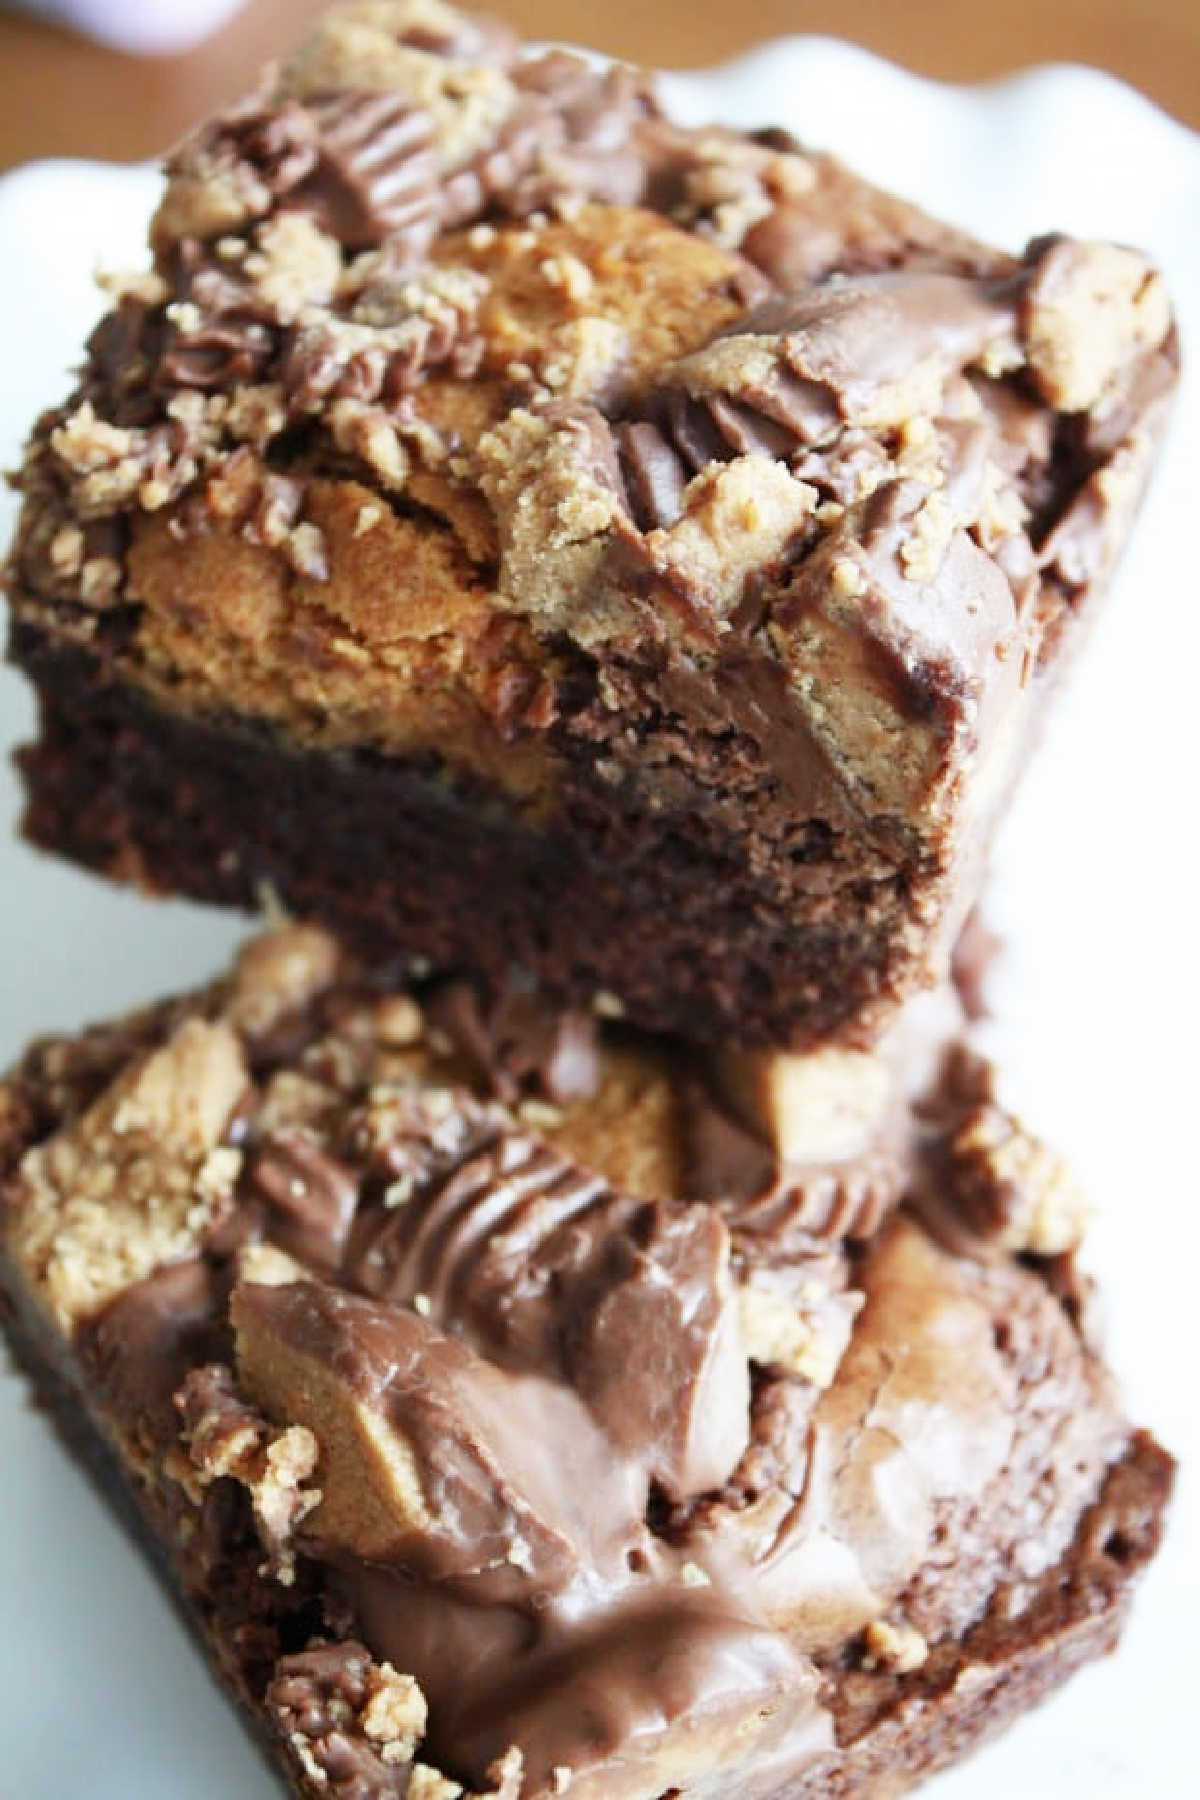 Cheap Party Food Ideas - Reese's Peanut Butter Cup Brownies